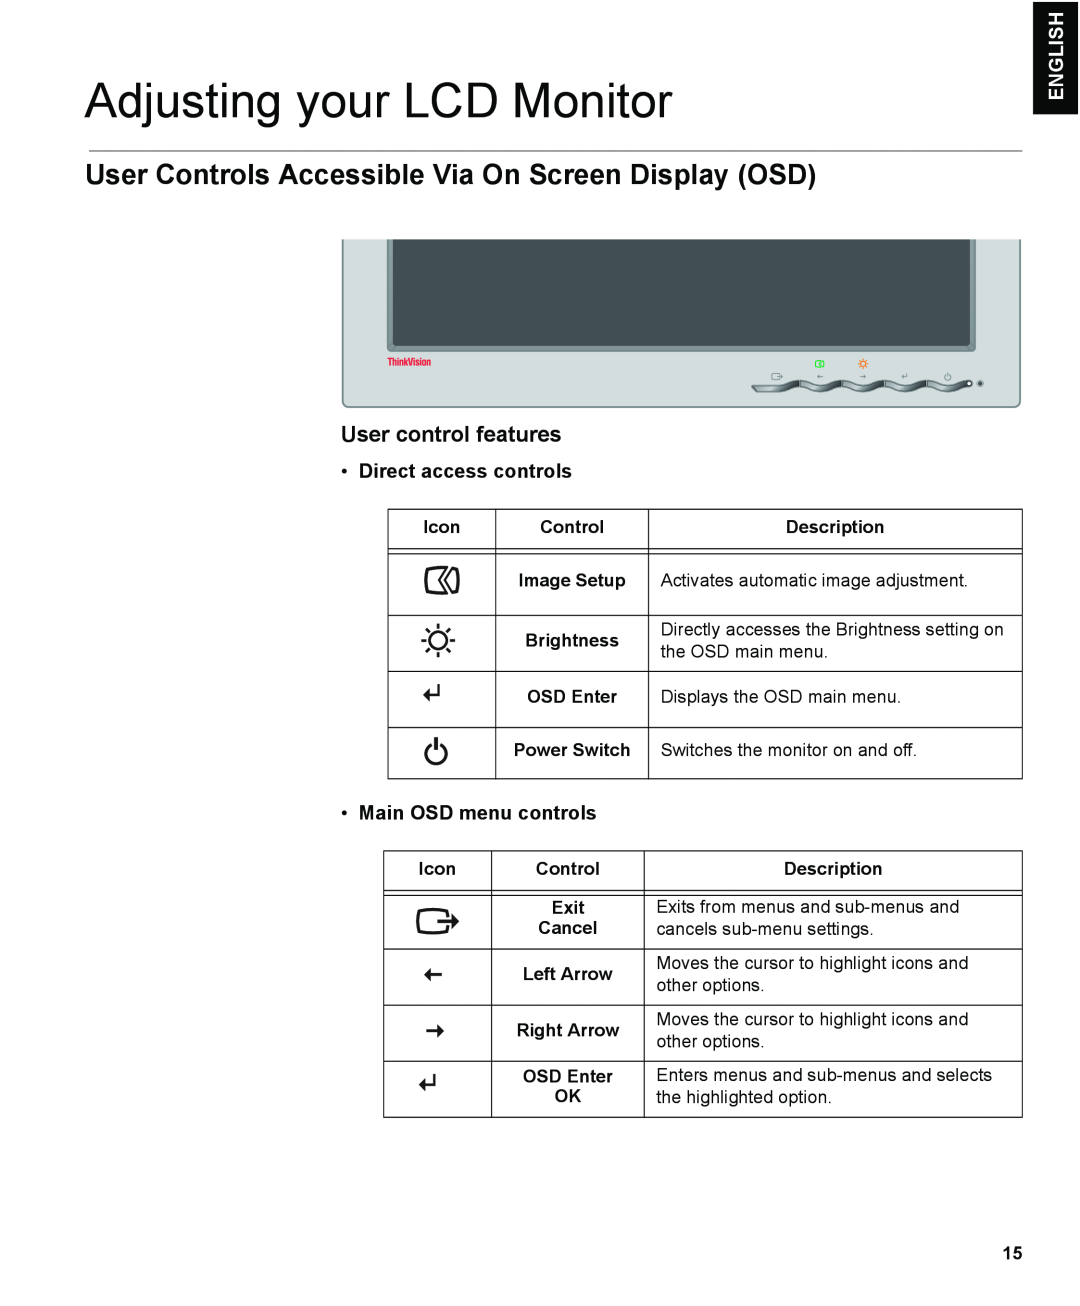 IBM L150 manual Adjusting your LCD Monitor, User Controls Accessible Via On Screen Display OSD, User control features 